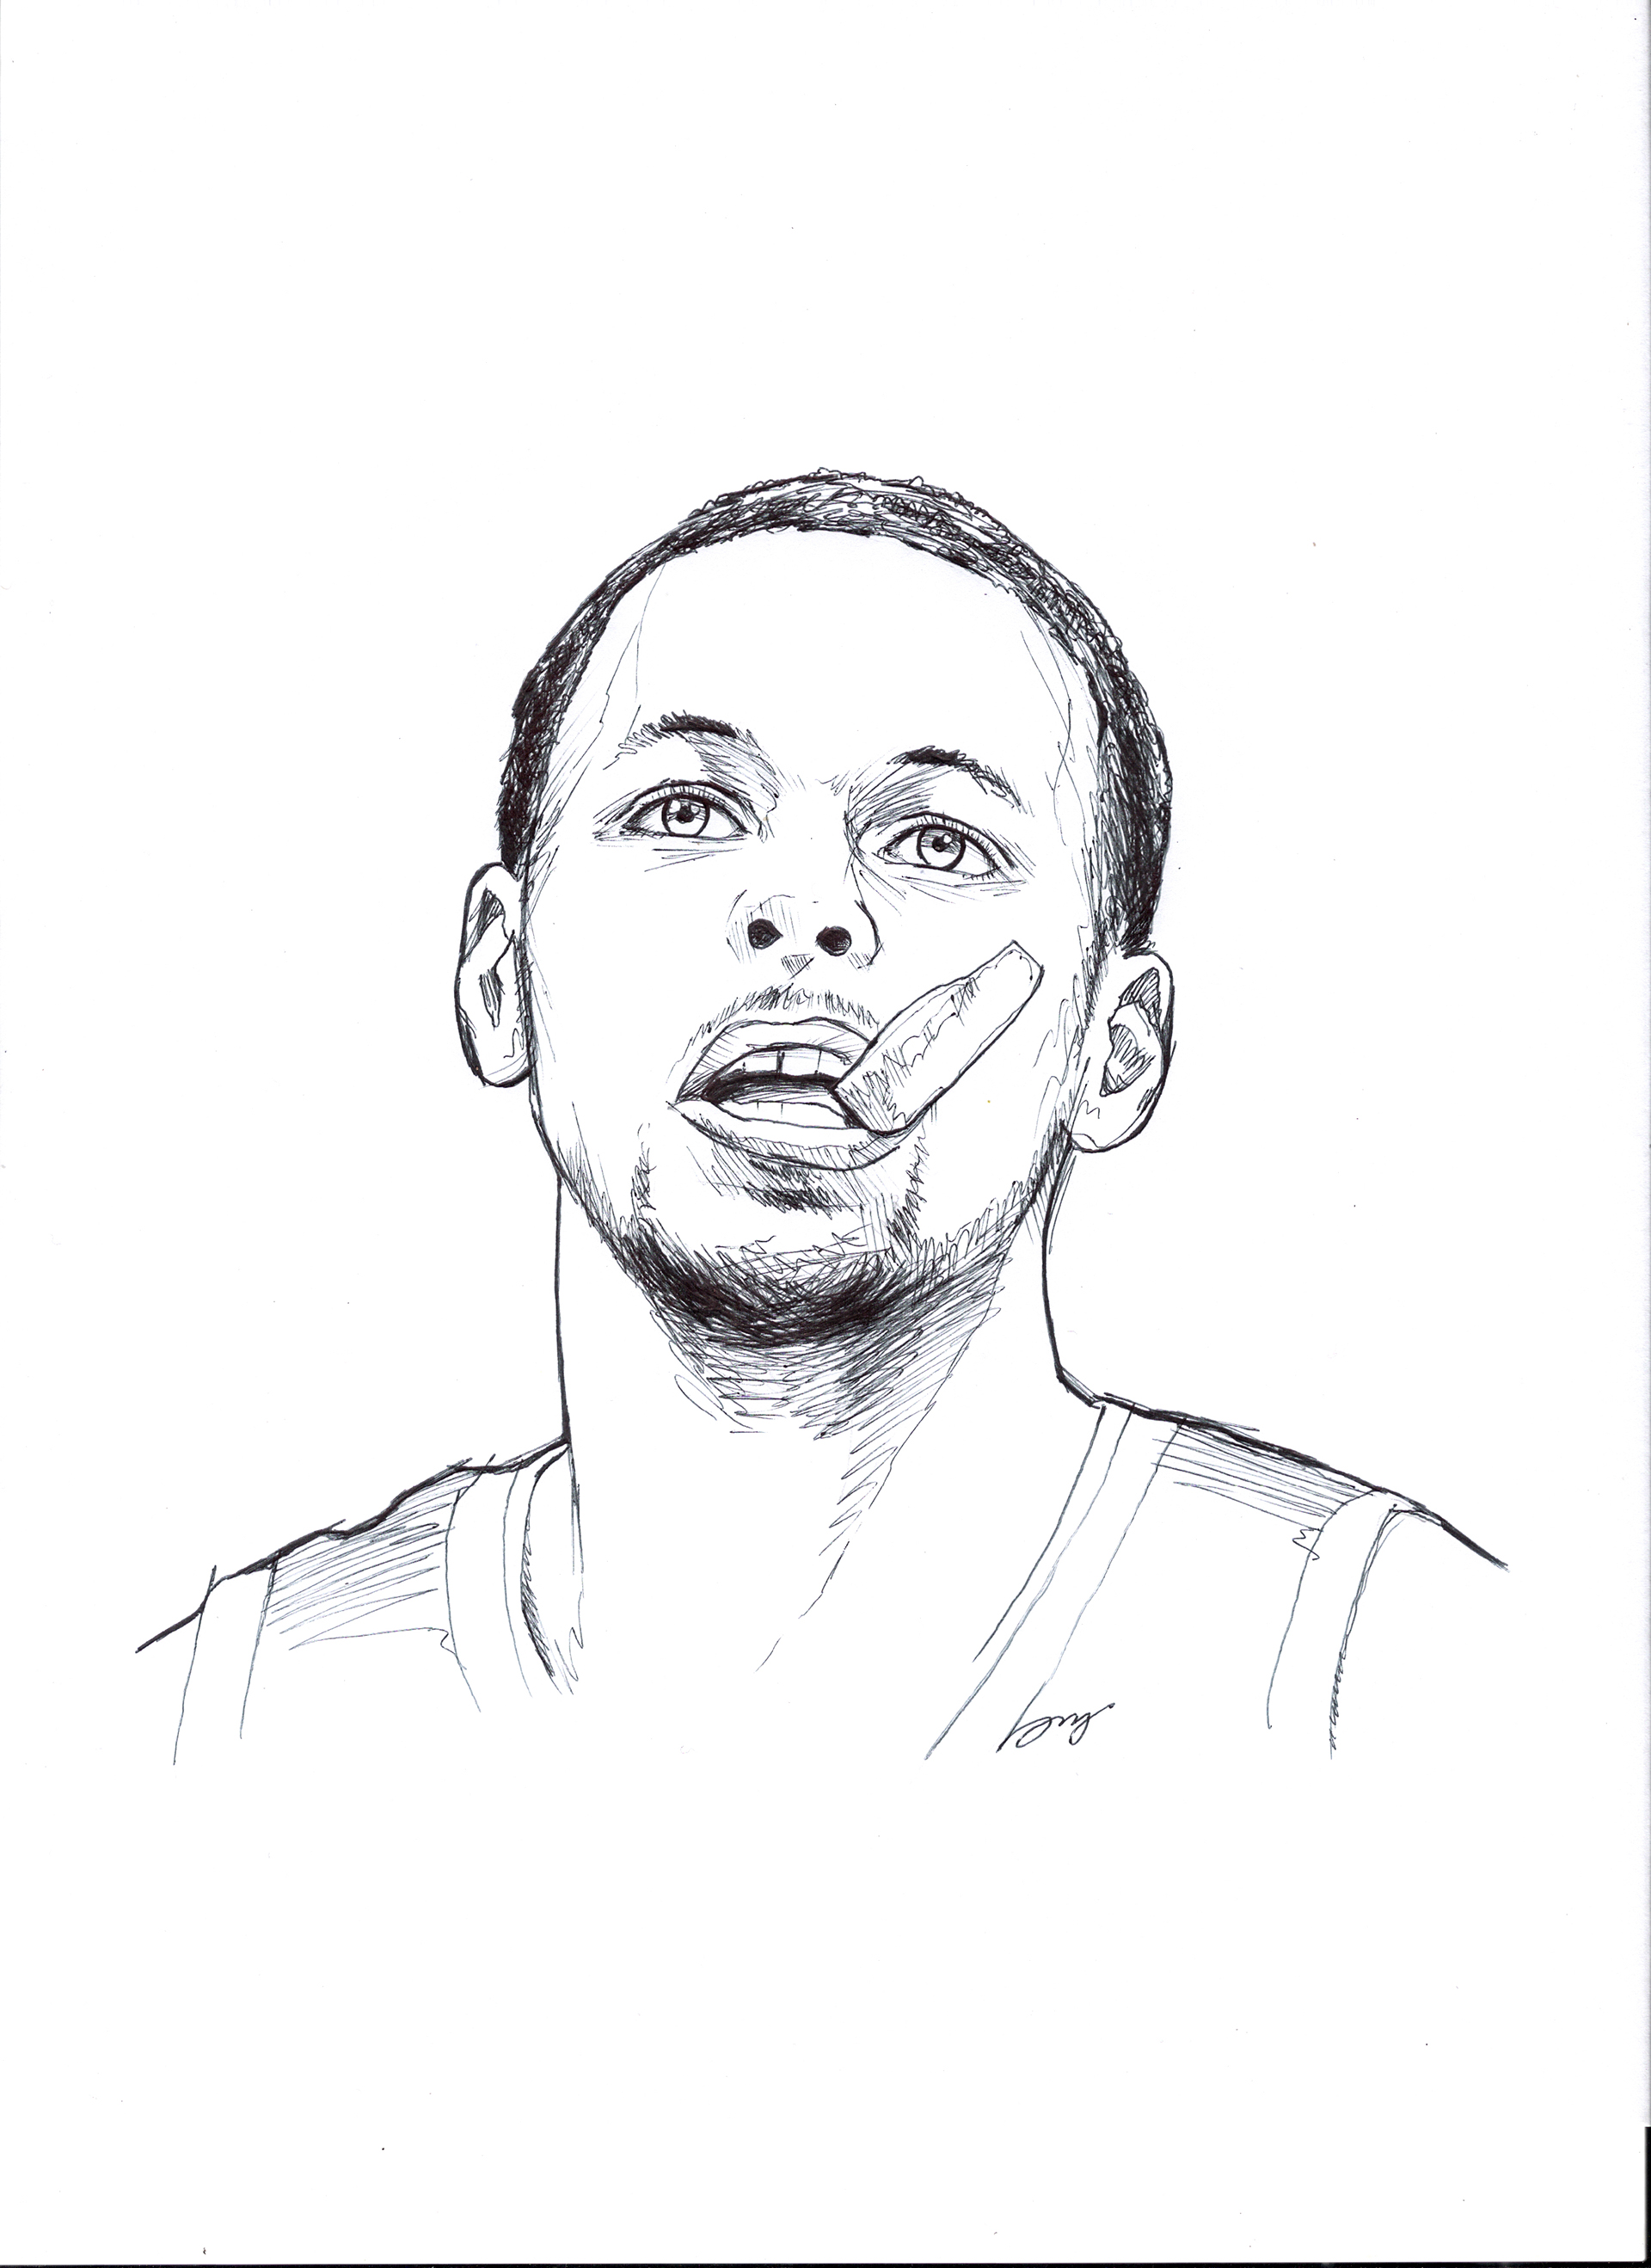 stephen curry coloring pages